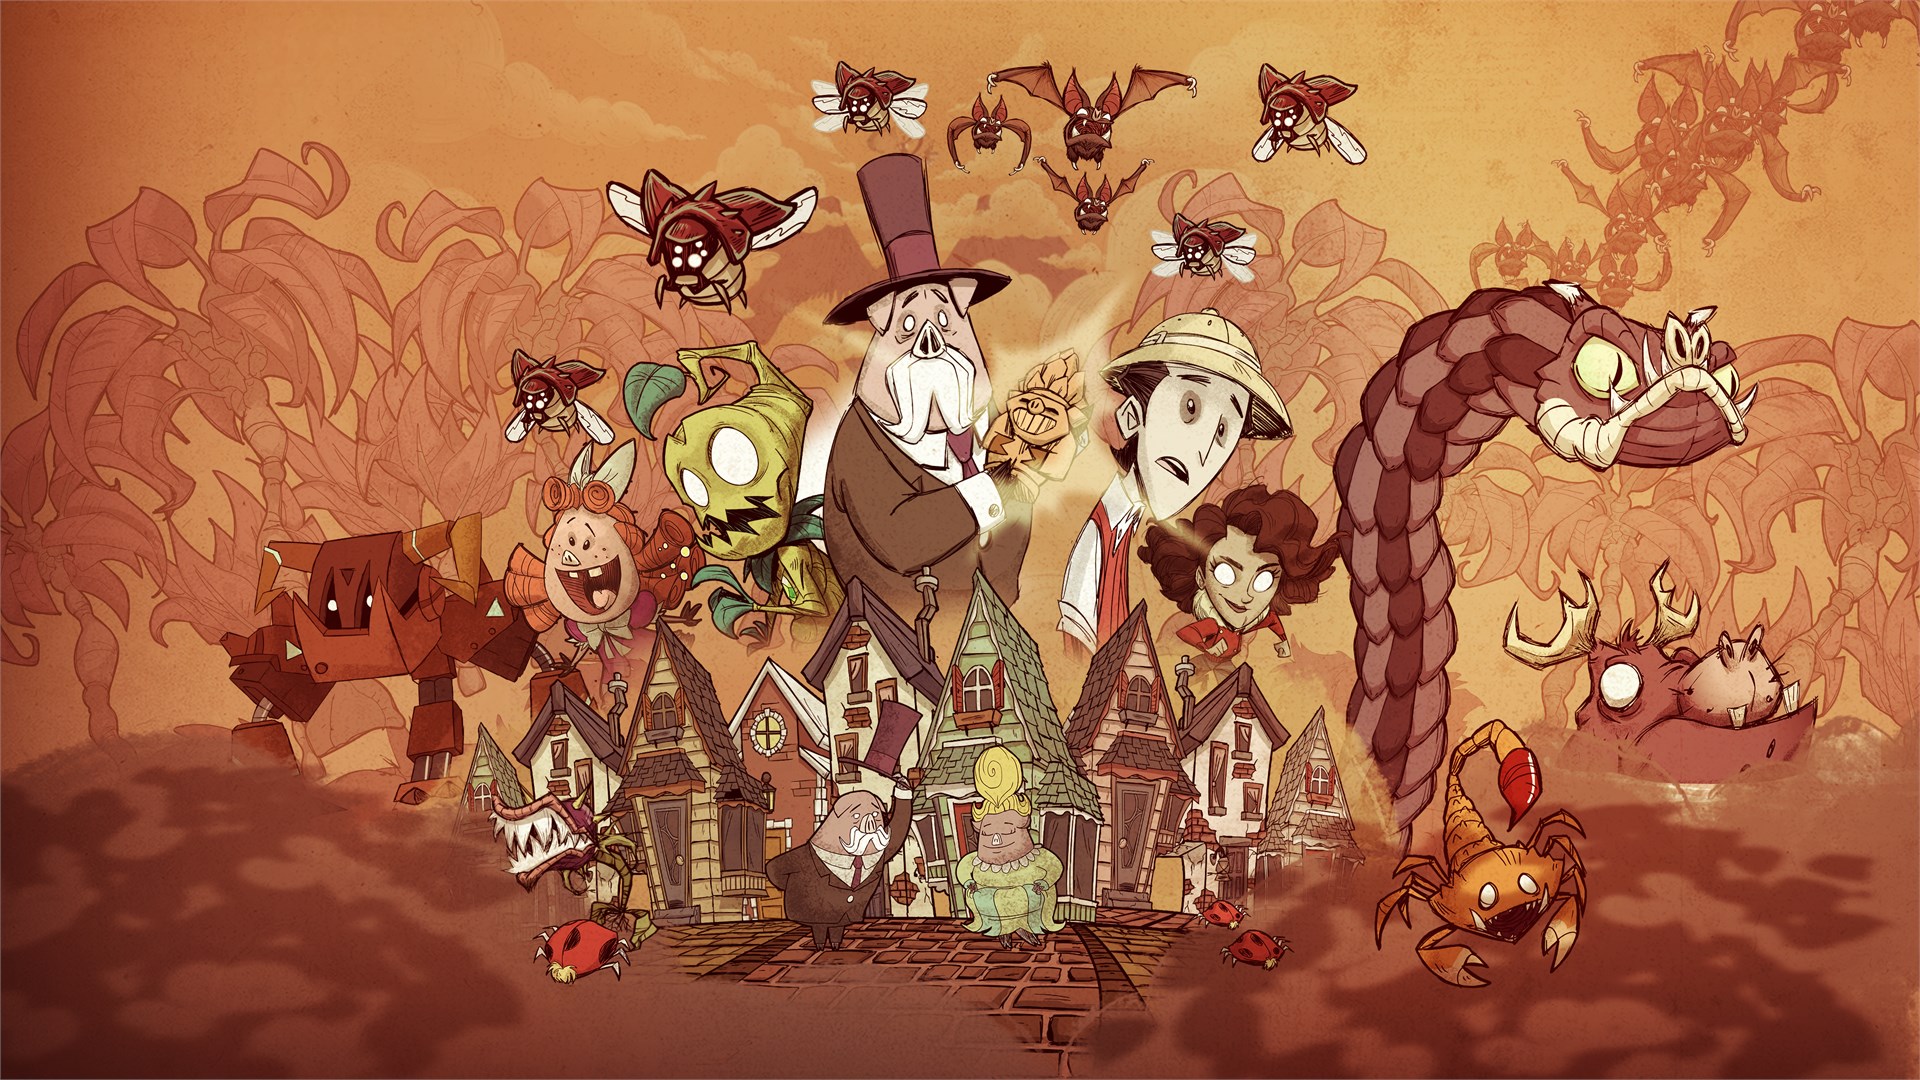 Донт старв длс. Донт старв. Игра don't Starve together. Don't Starve Klei Entertainment. Don't Starve Хамлет.